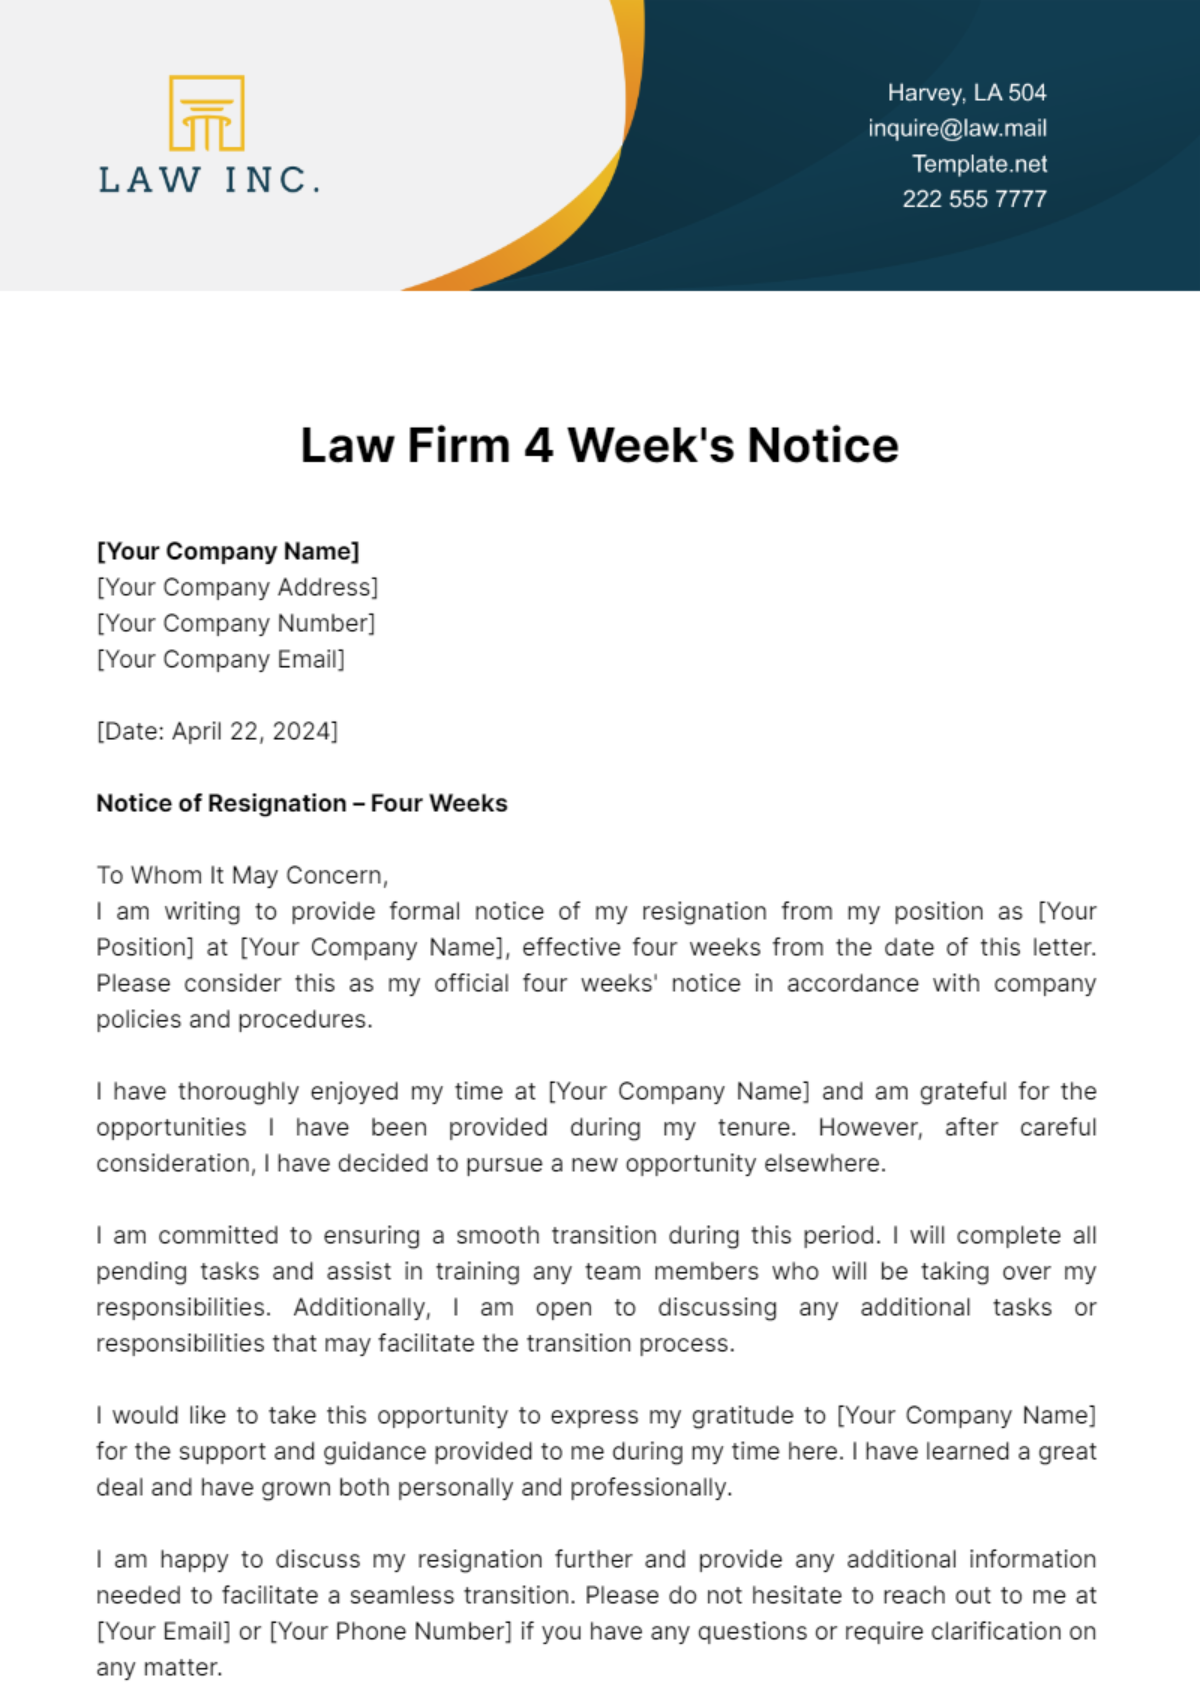 Free Law Firm 4 Week's Notice Template